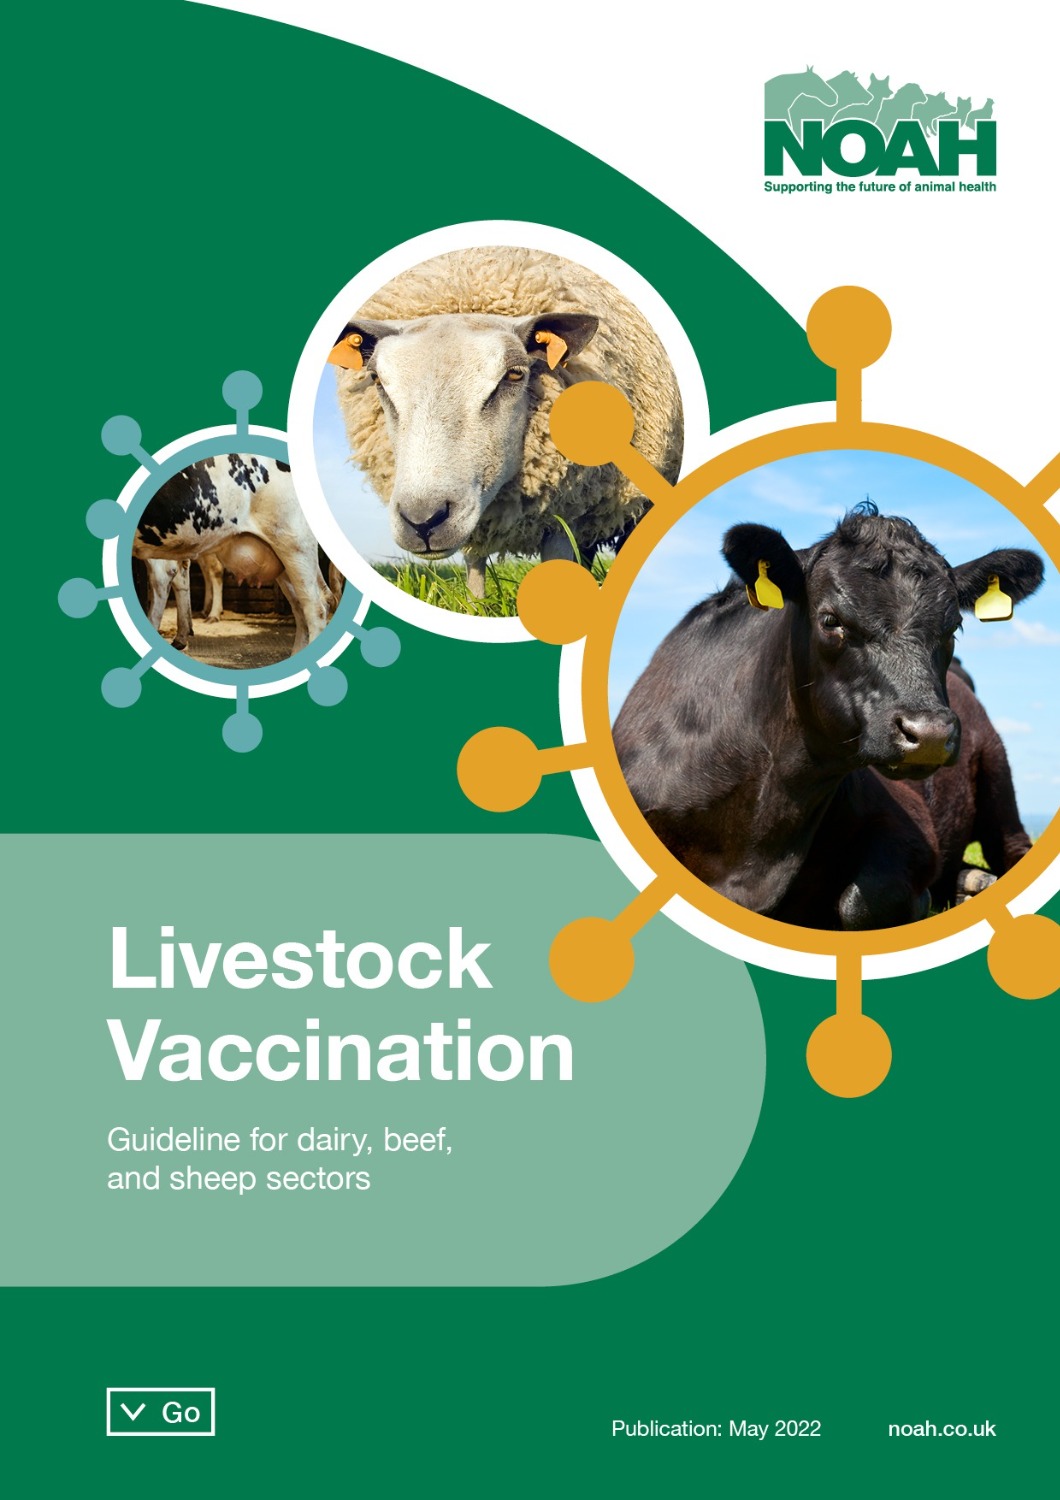 Veterinary medicines and vaccines are vital to the success of the UK